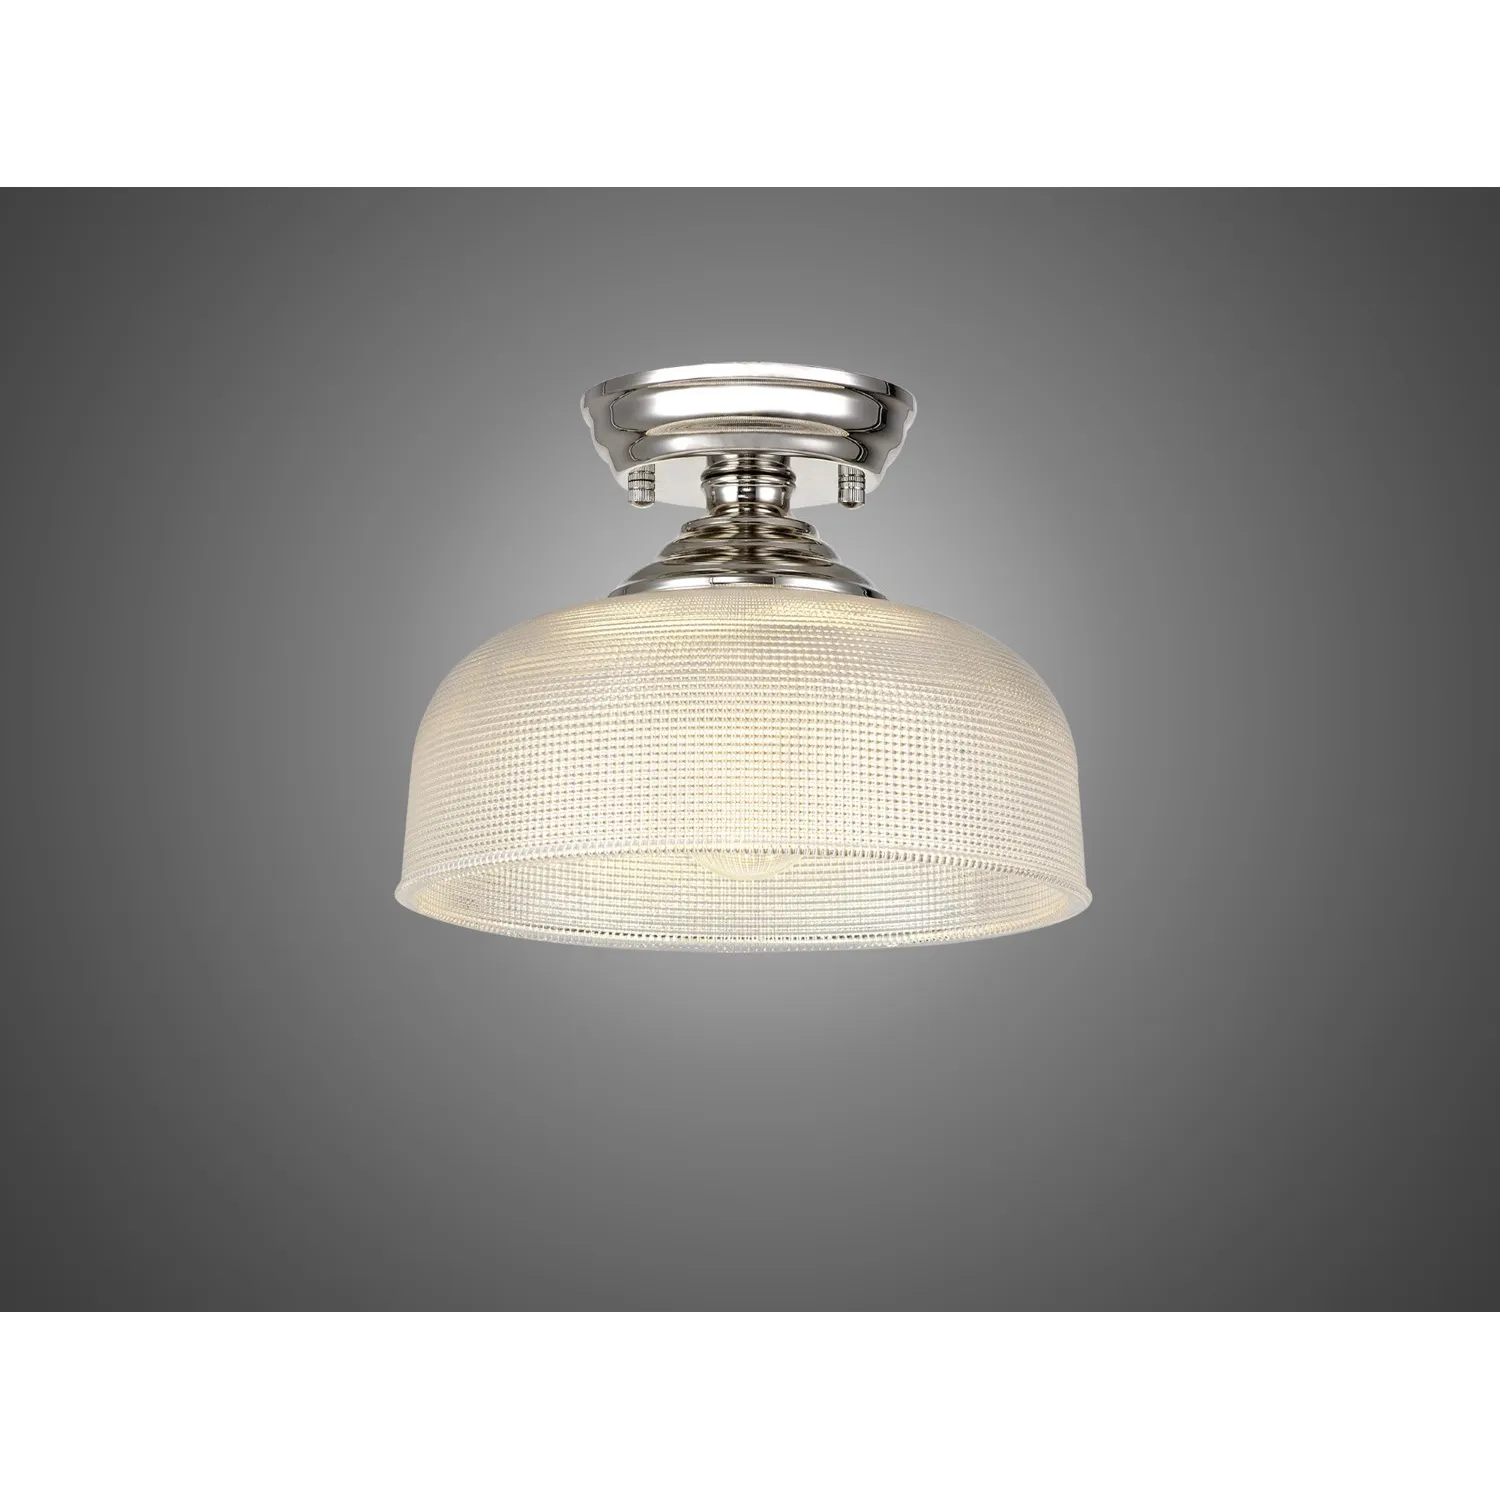 Billericay 1 Light Flush Ceiling E27 With Round 26.5cm Prismatic Effect Glass Shade Polished Nickel Clear